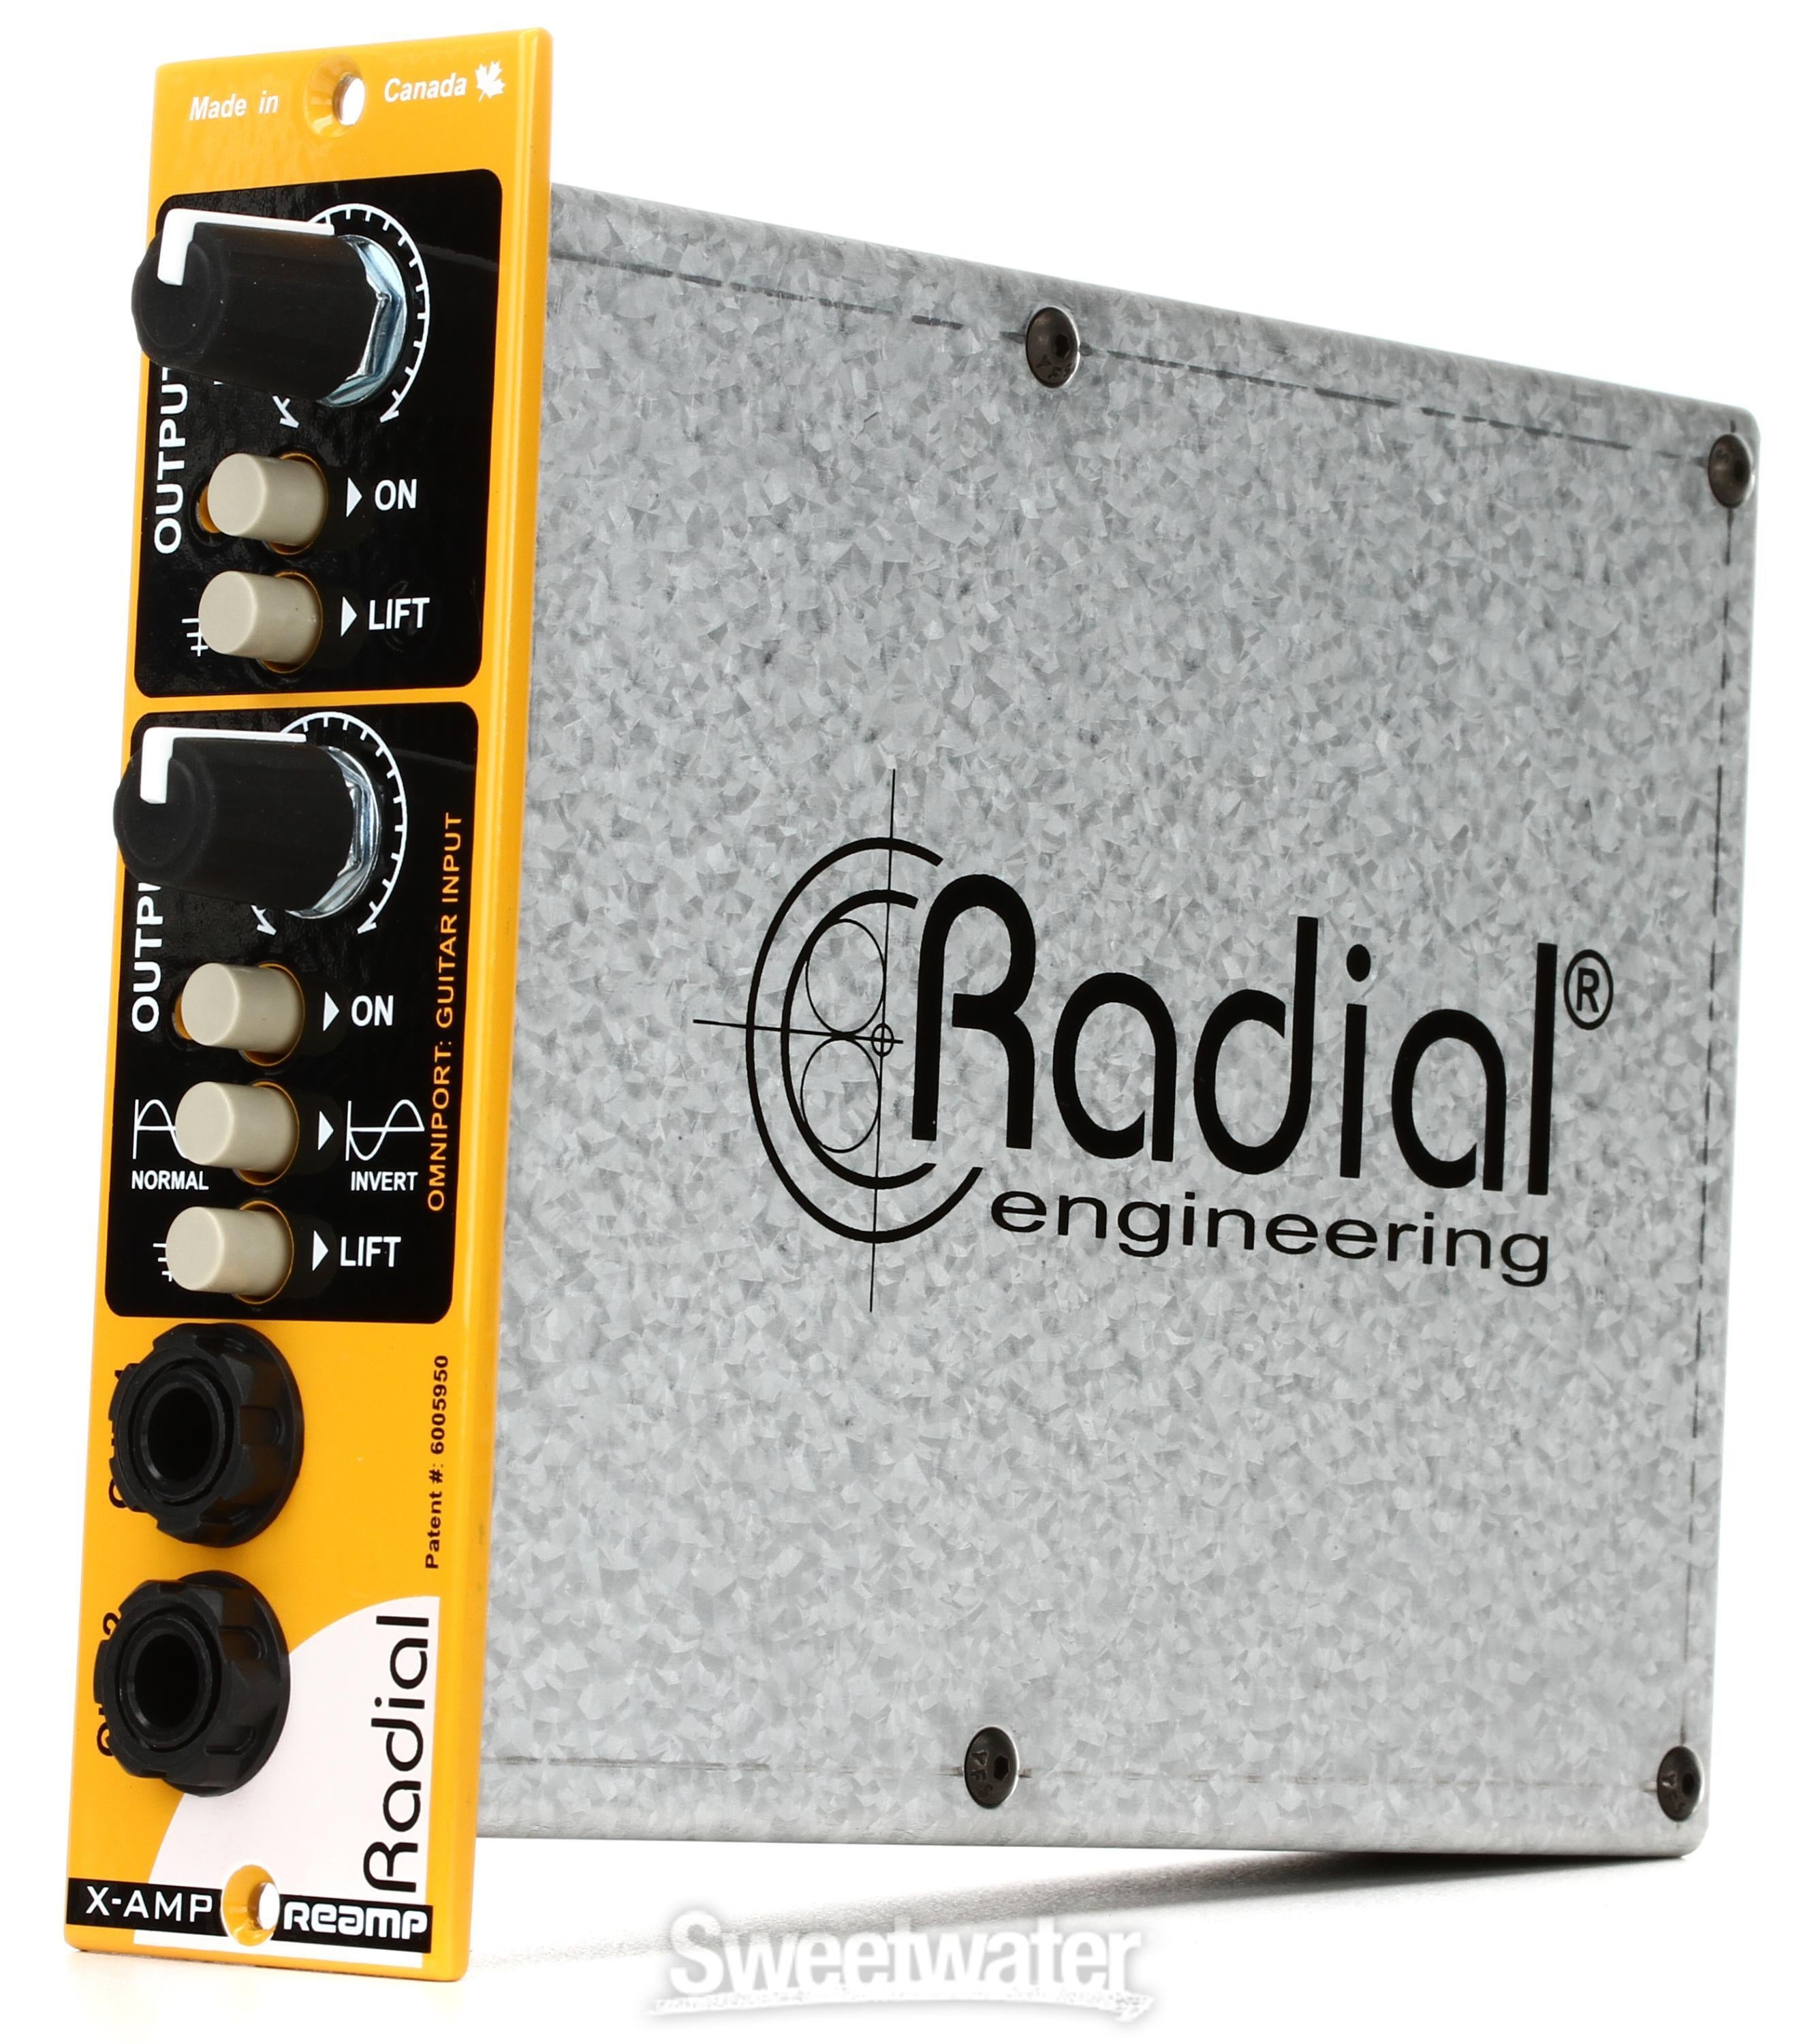 Radial X-Amp 500 Series Re-amping Distro Module | Sweetwater